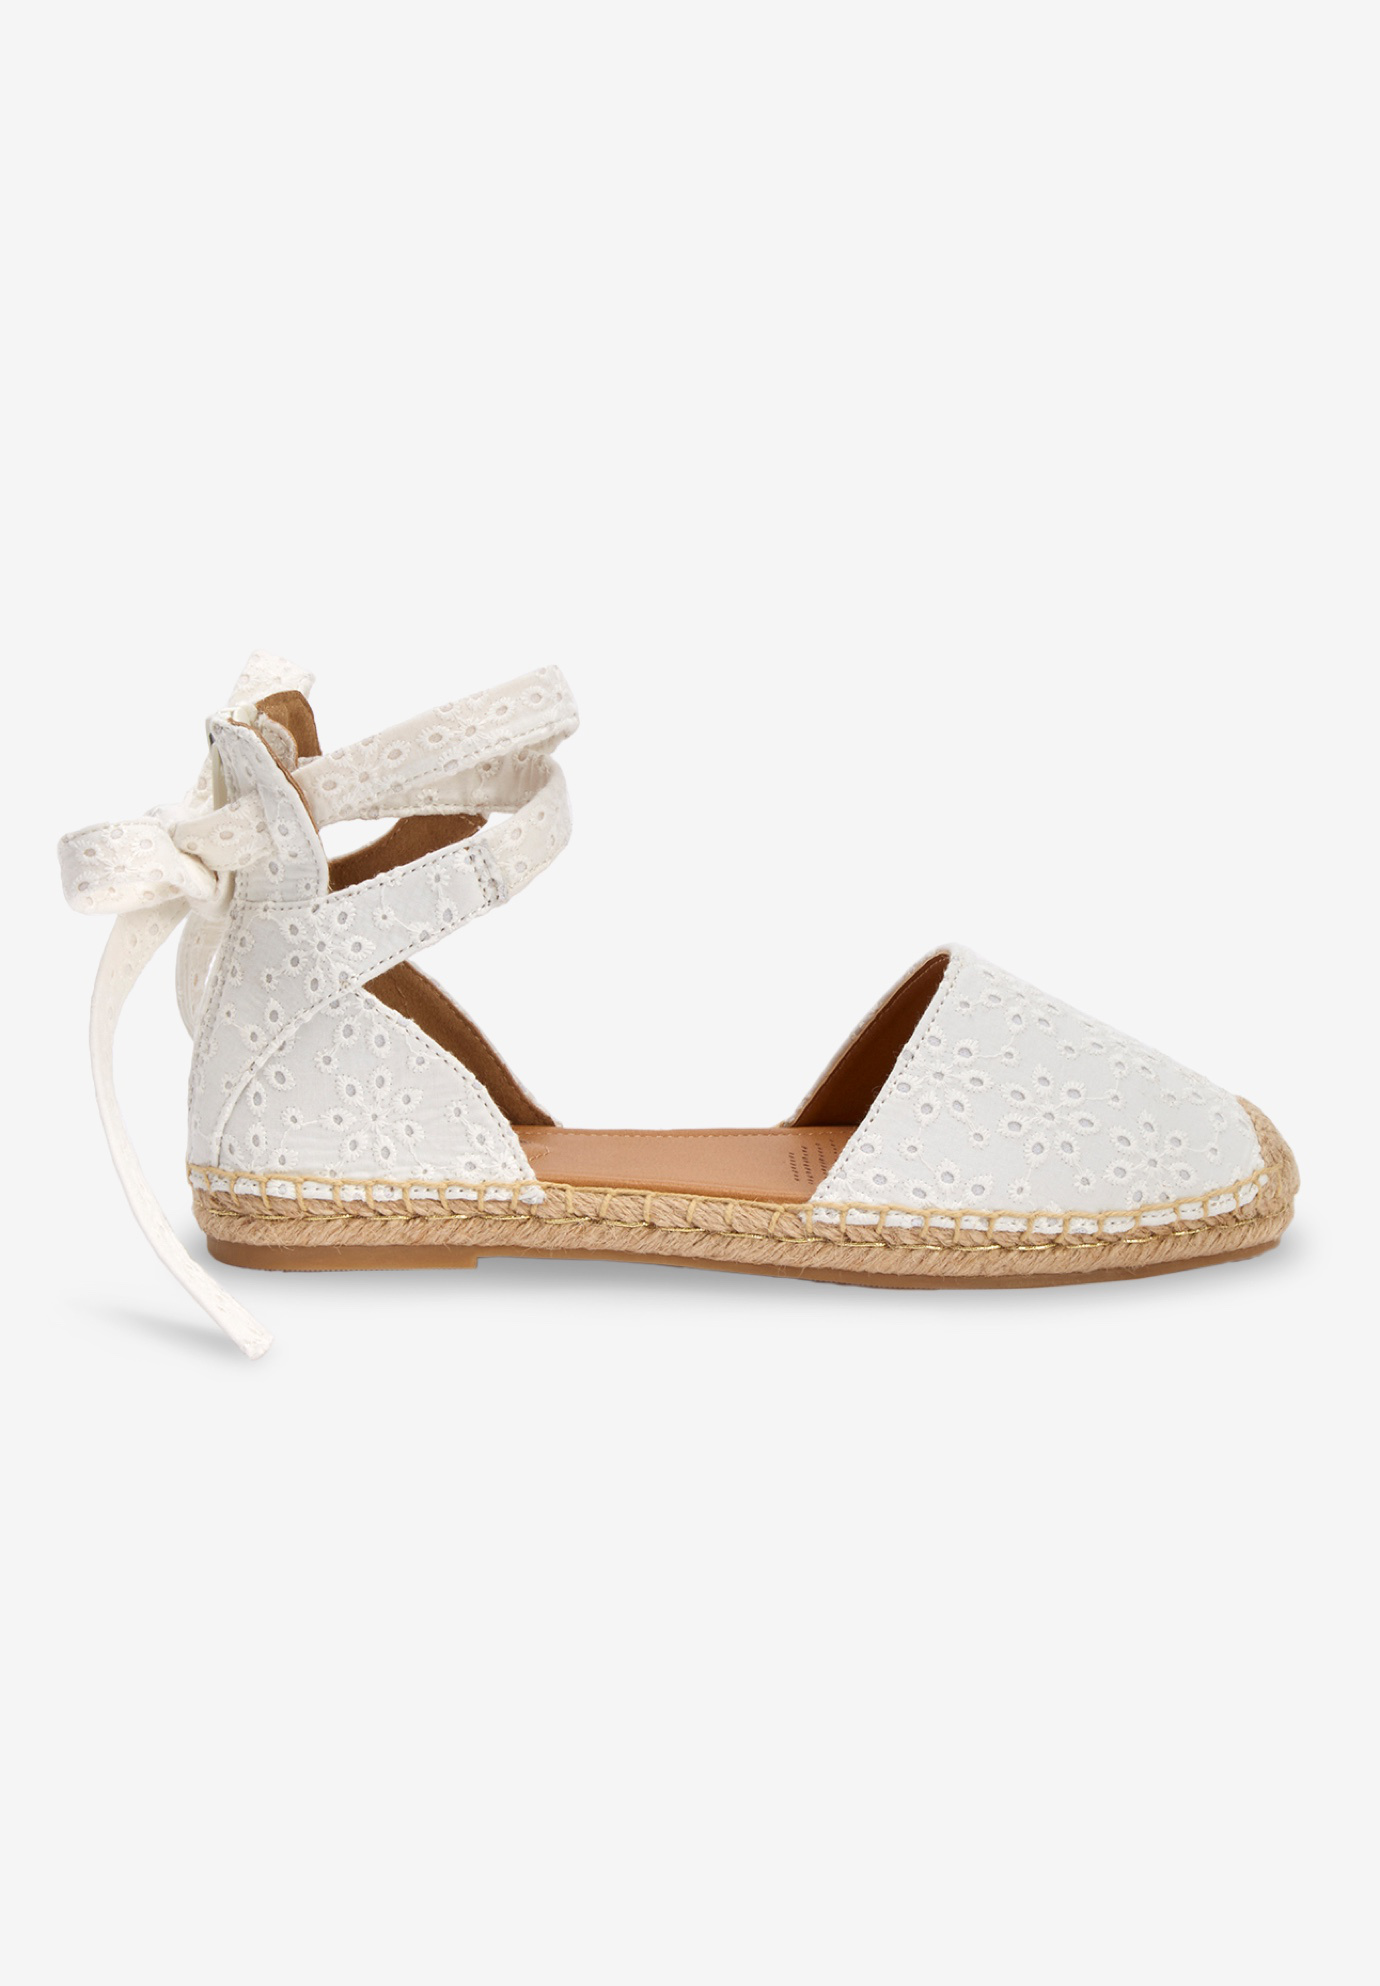 Comfortview Women's Wide Width The Shayla Flat Espadrille Shoes - image 5 of 7